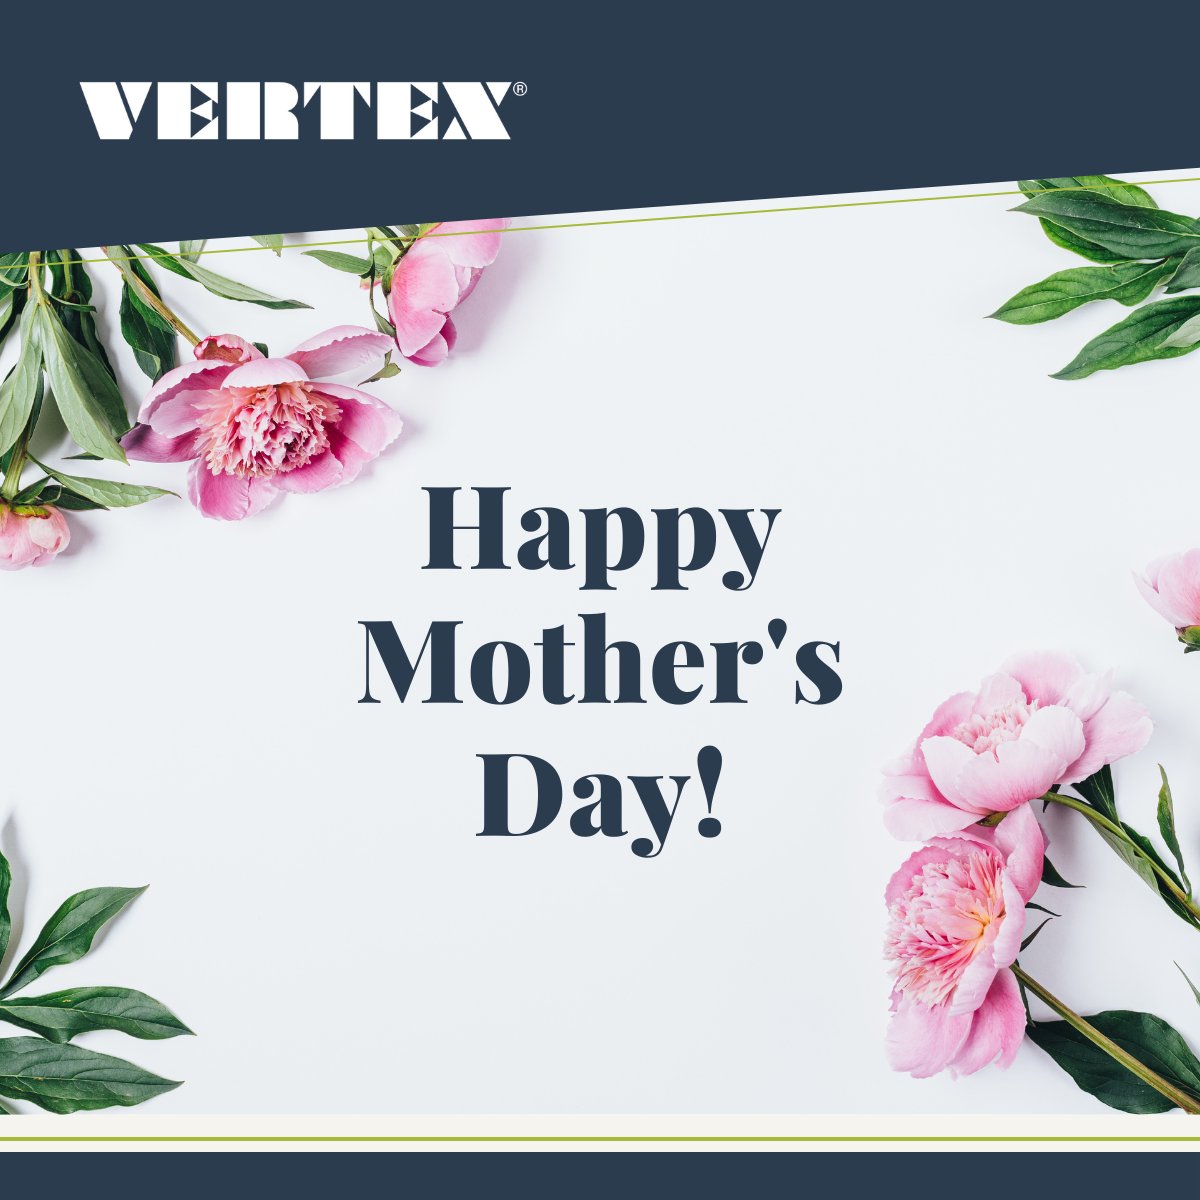 Happy Mother's Day from all of us at VERTEX! Today, we celebrate the incredible strength, love, and wisdom of mothers everywhere. Thank you for all you do! #MothersDay #Gratitude #Vertexeng